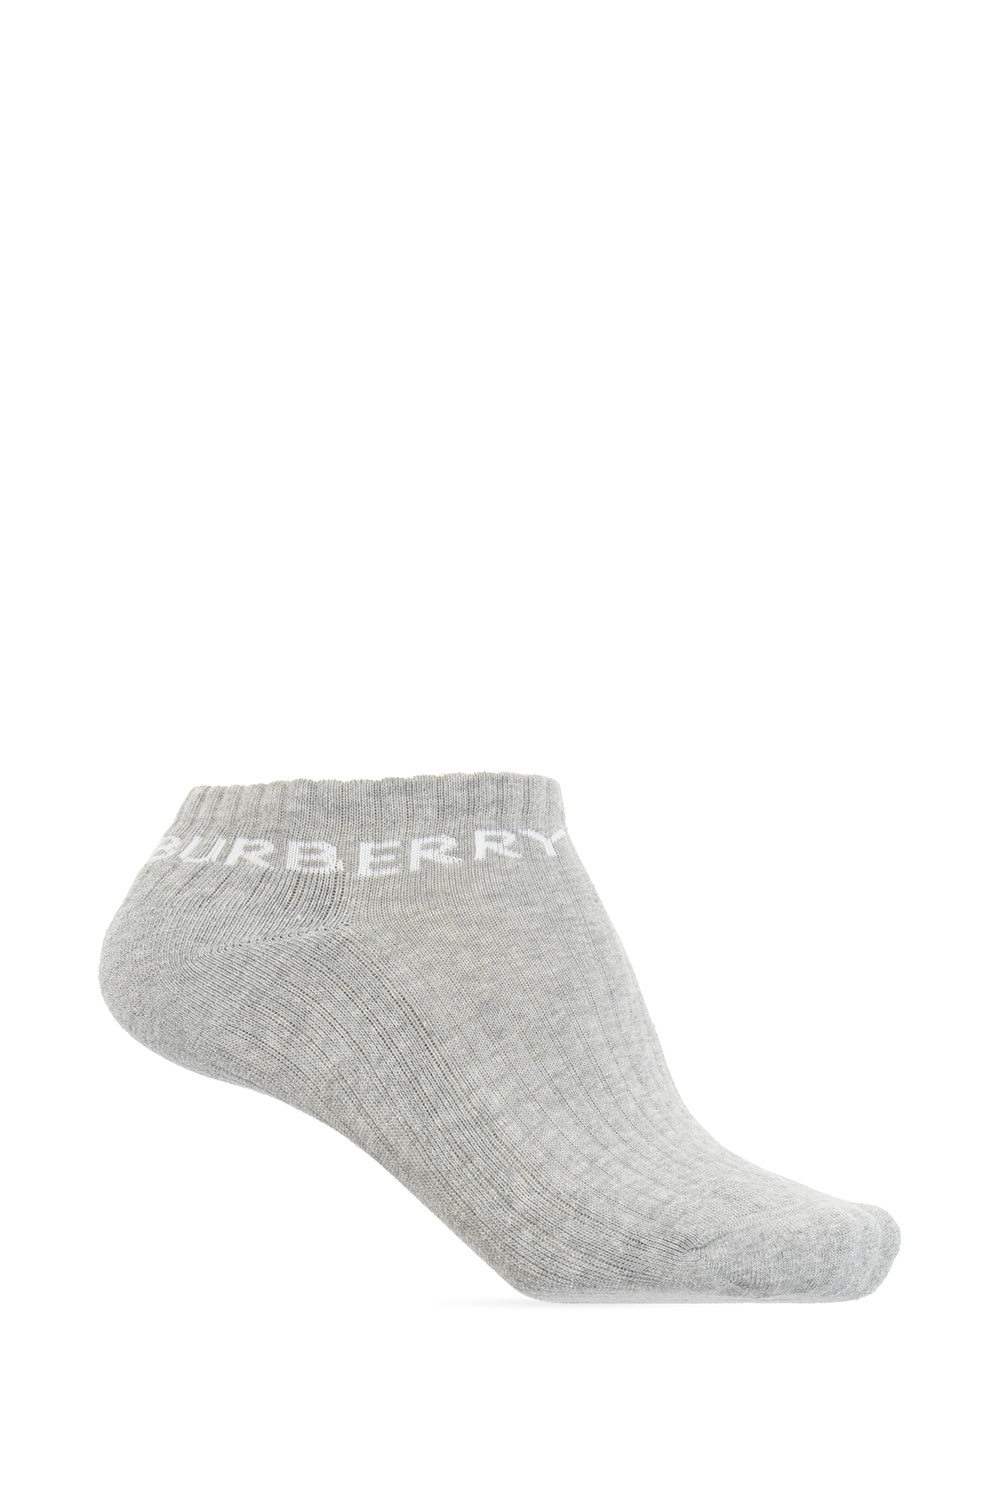 Burberry T-shirt burberry CHECKED LEATHER SHOES